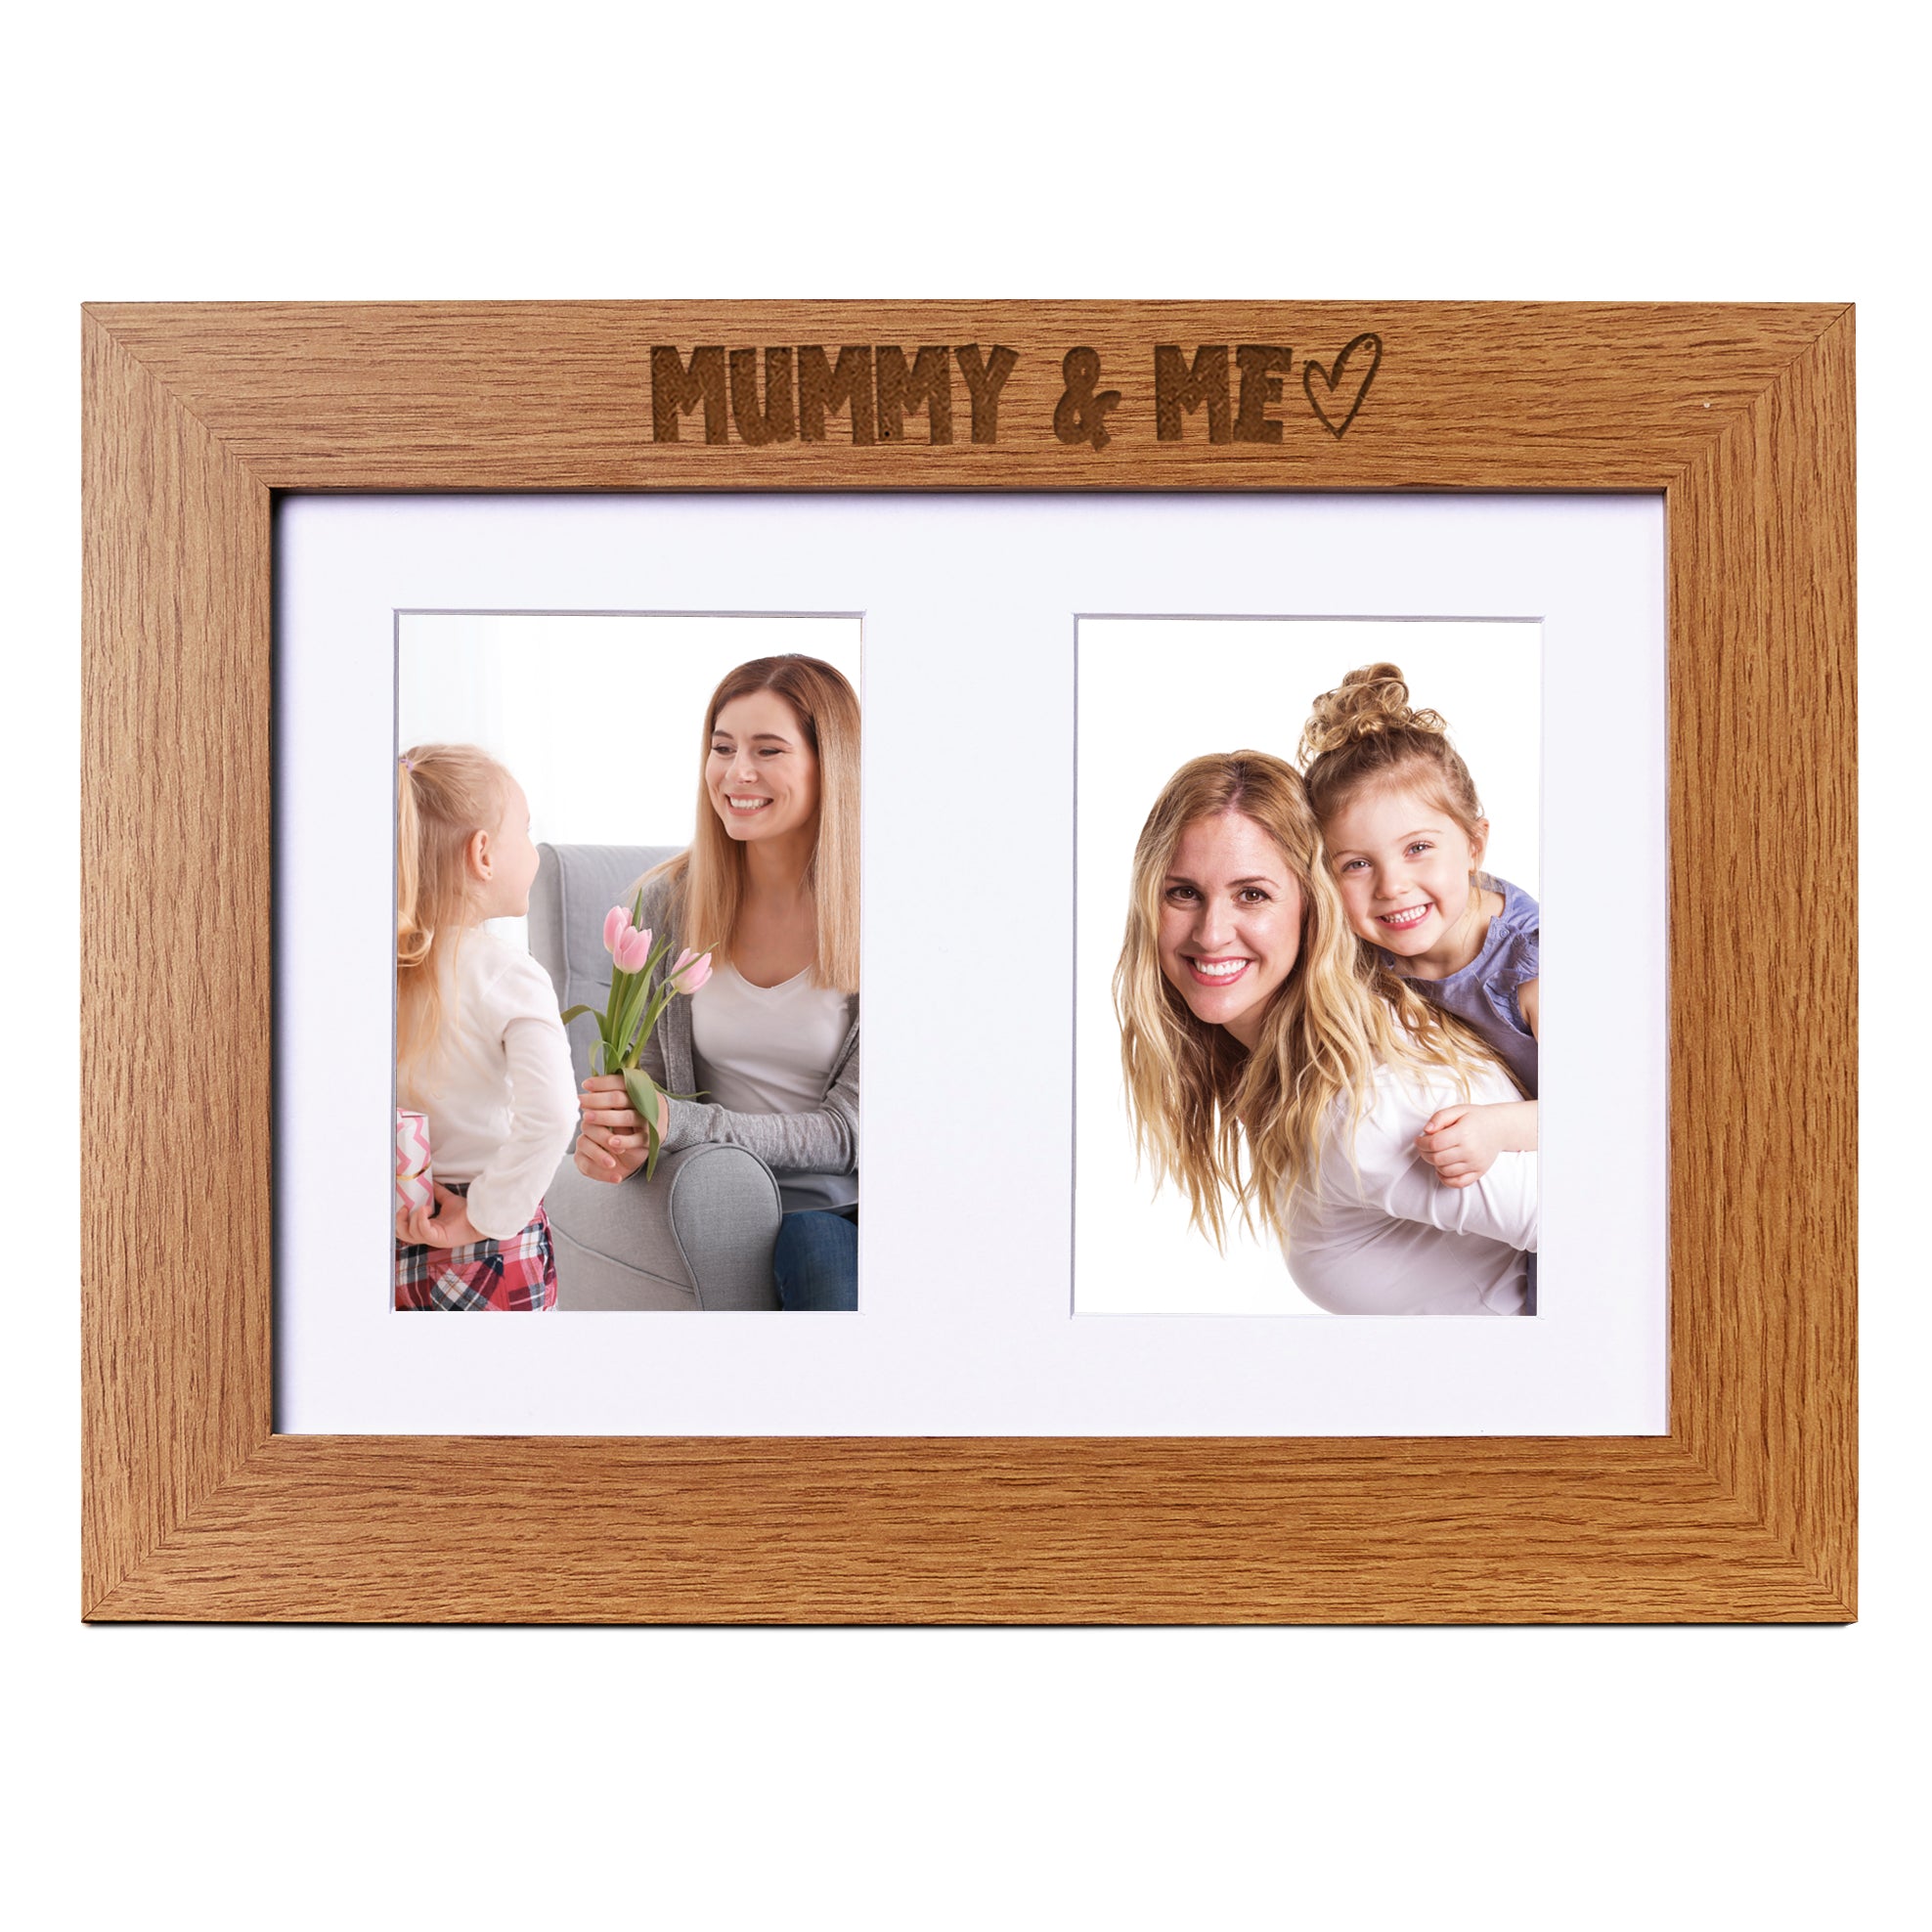 Mummy and Me Photo Picture Frame Double 6x4 Inch